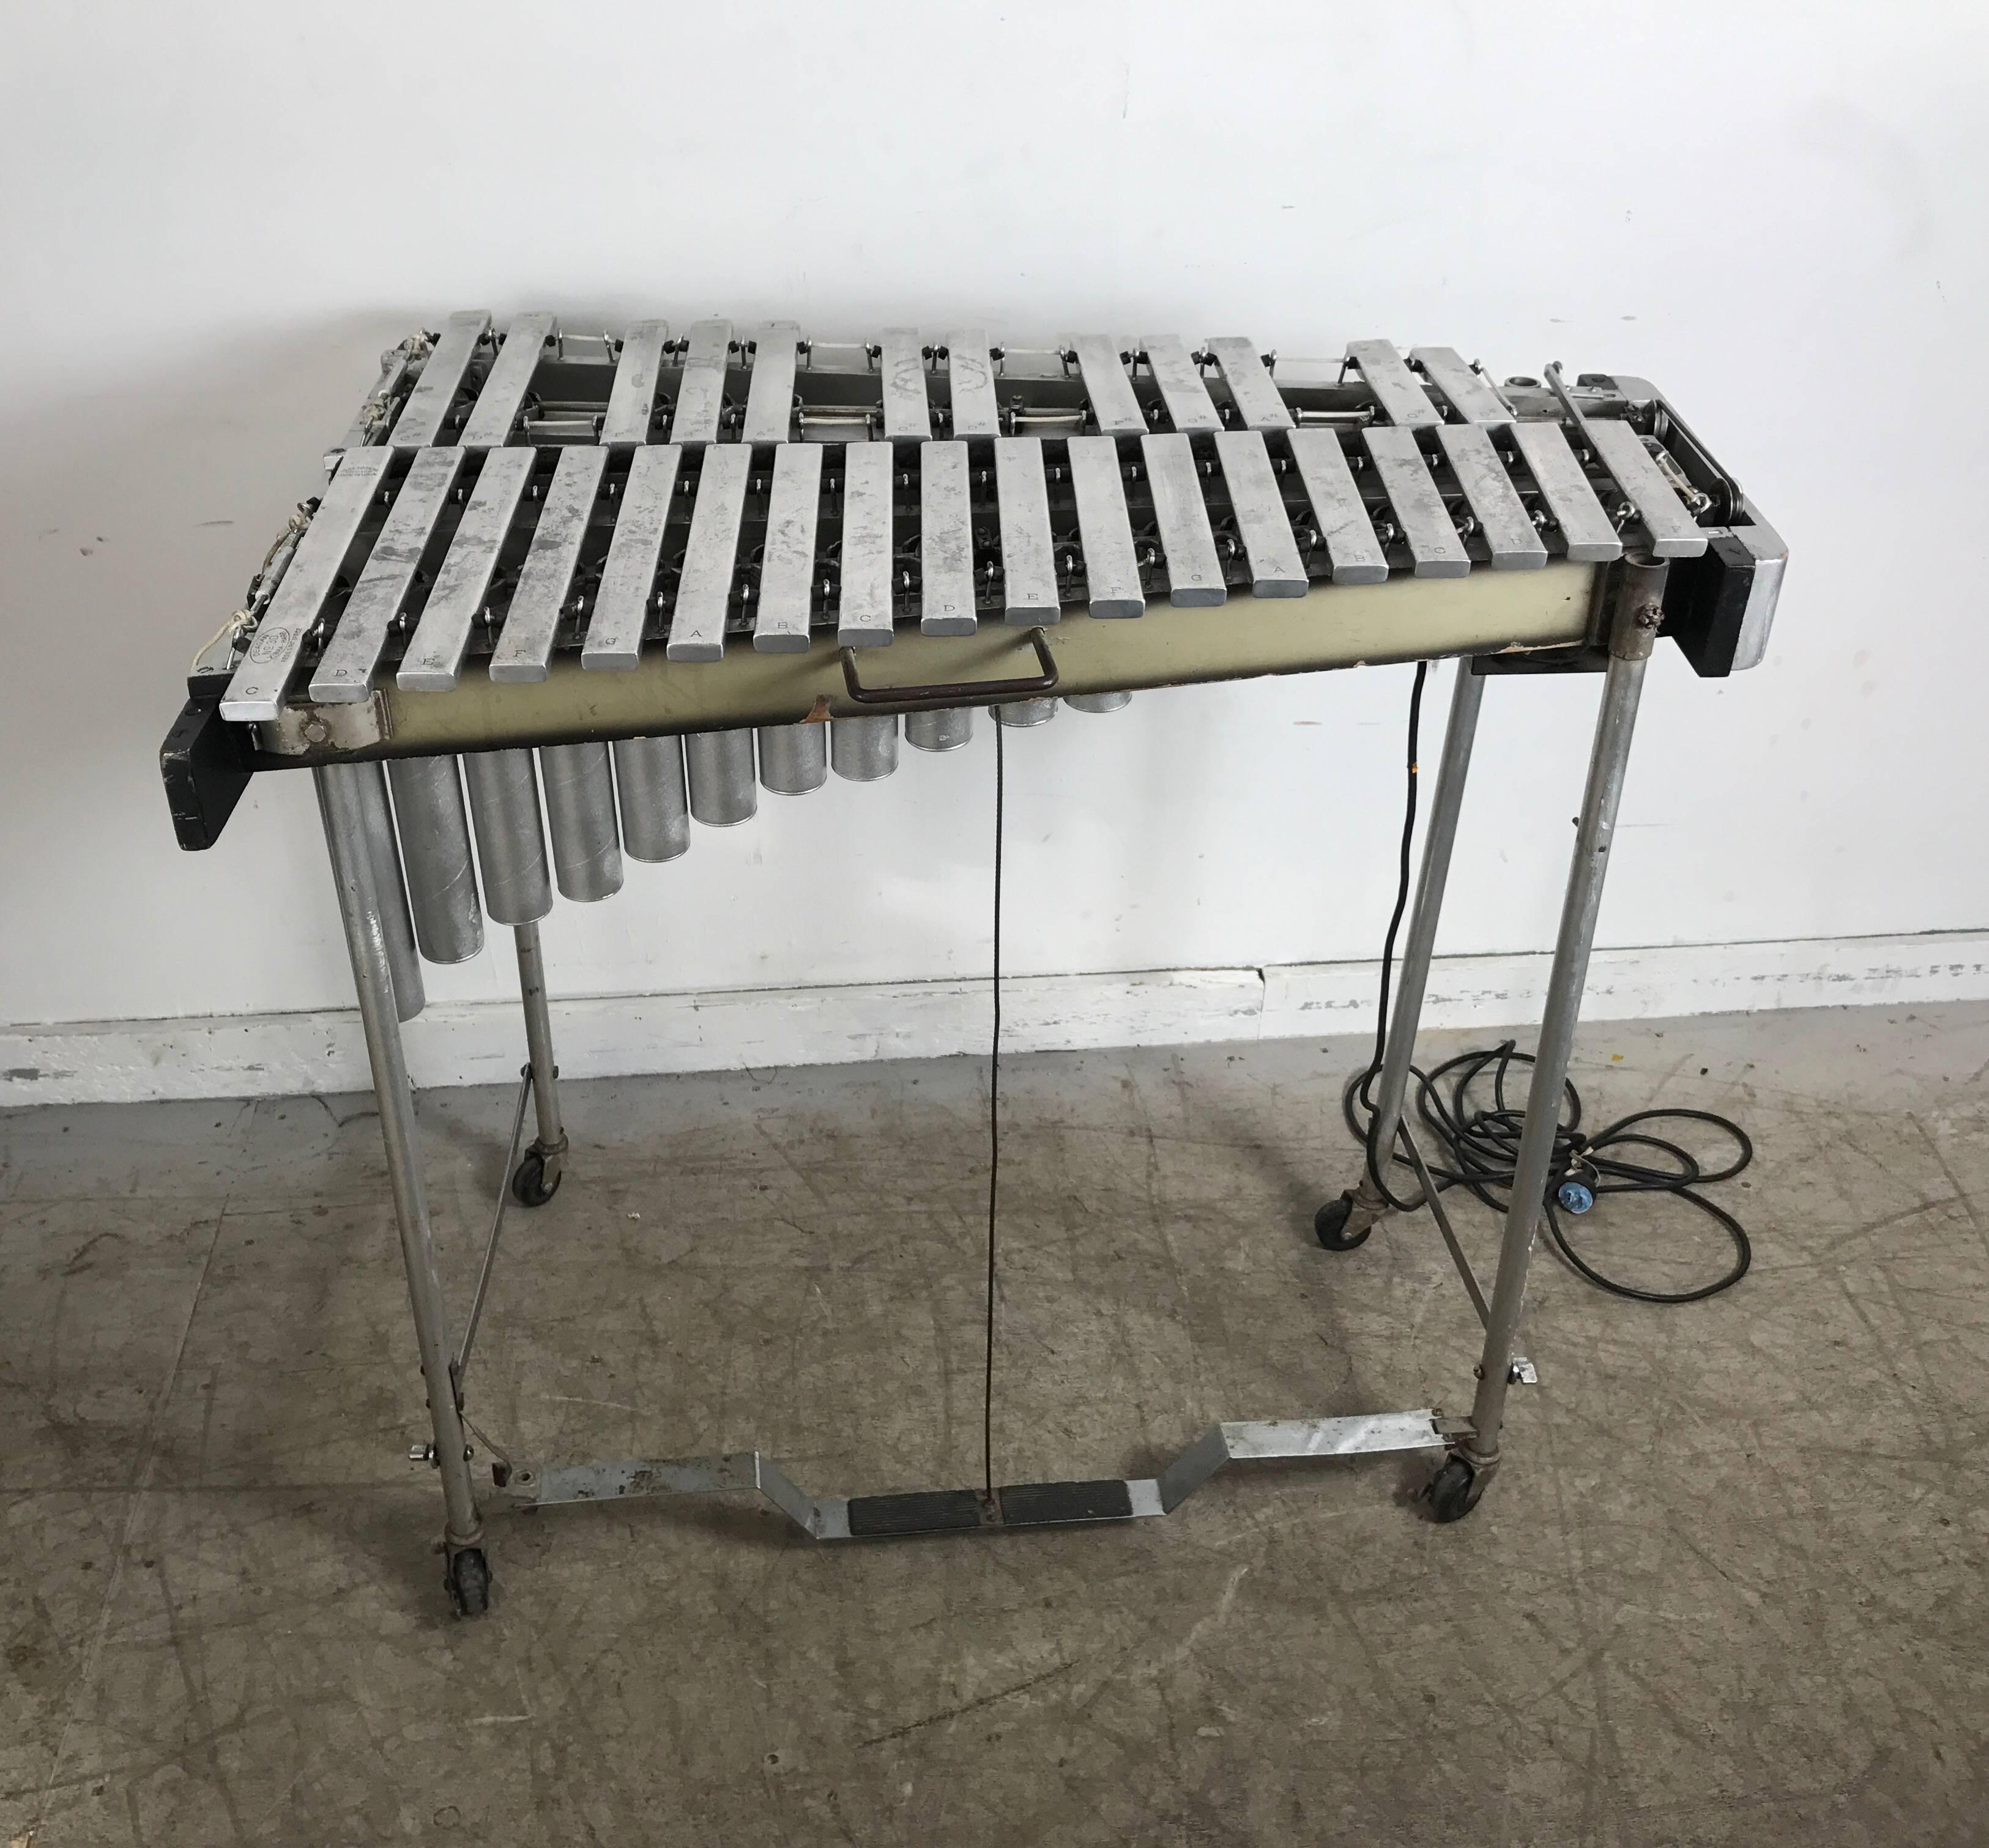 The vibraharp or vibraphone is the most recently developed mallet percussion instrument, yet it can claim more world-renown artists, more abundant recordings, and wider recognition by the general public than any other mallet instrument. Of wholly